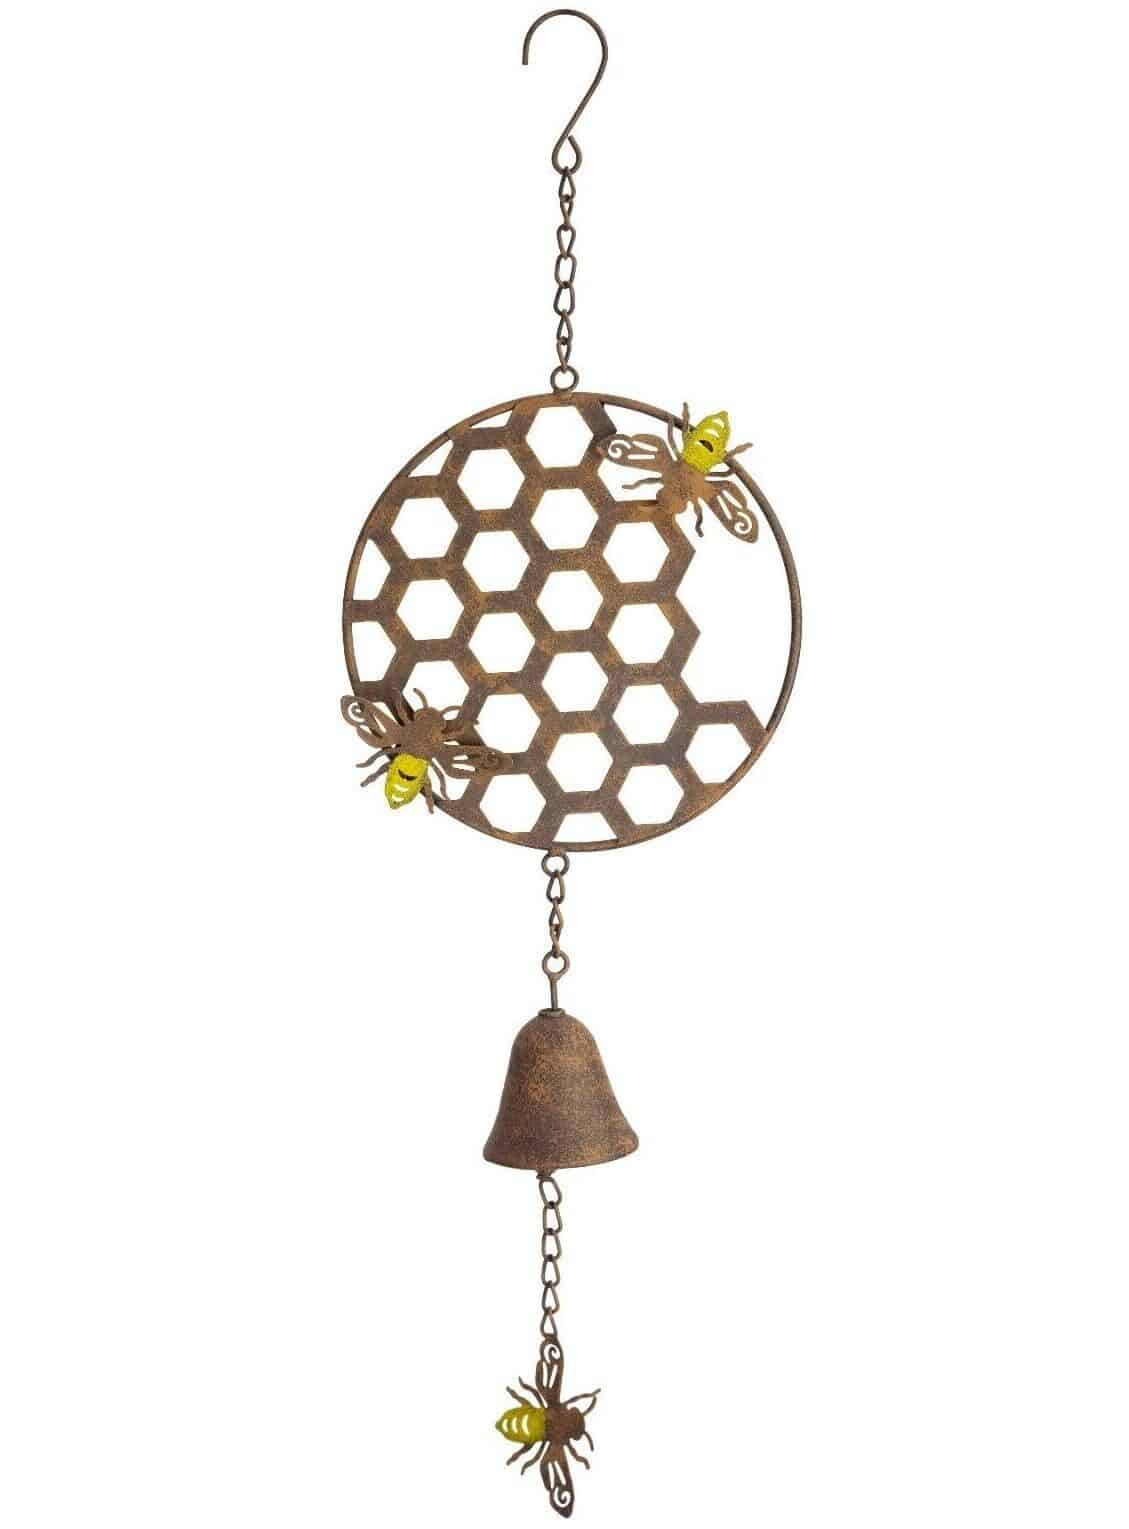 A bell hangs down from the beautiful honeycomb adorned with bumble bees. In beautiful tones of sunshine yellow & russet, situated on a white studio background